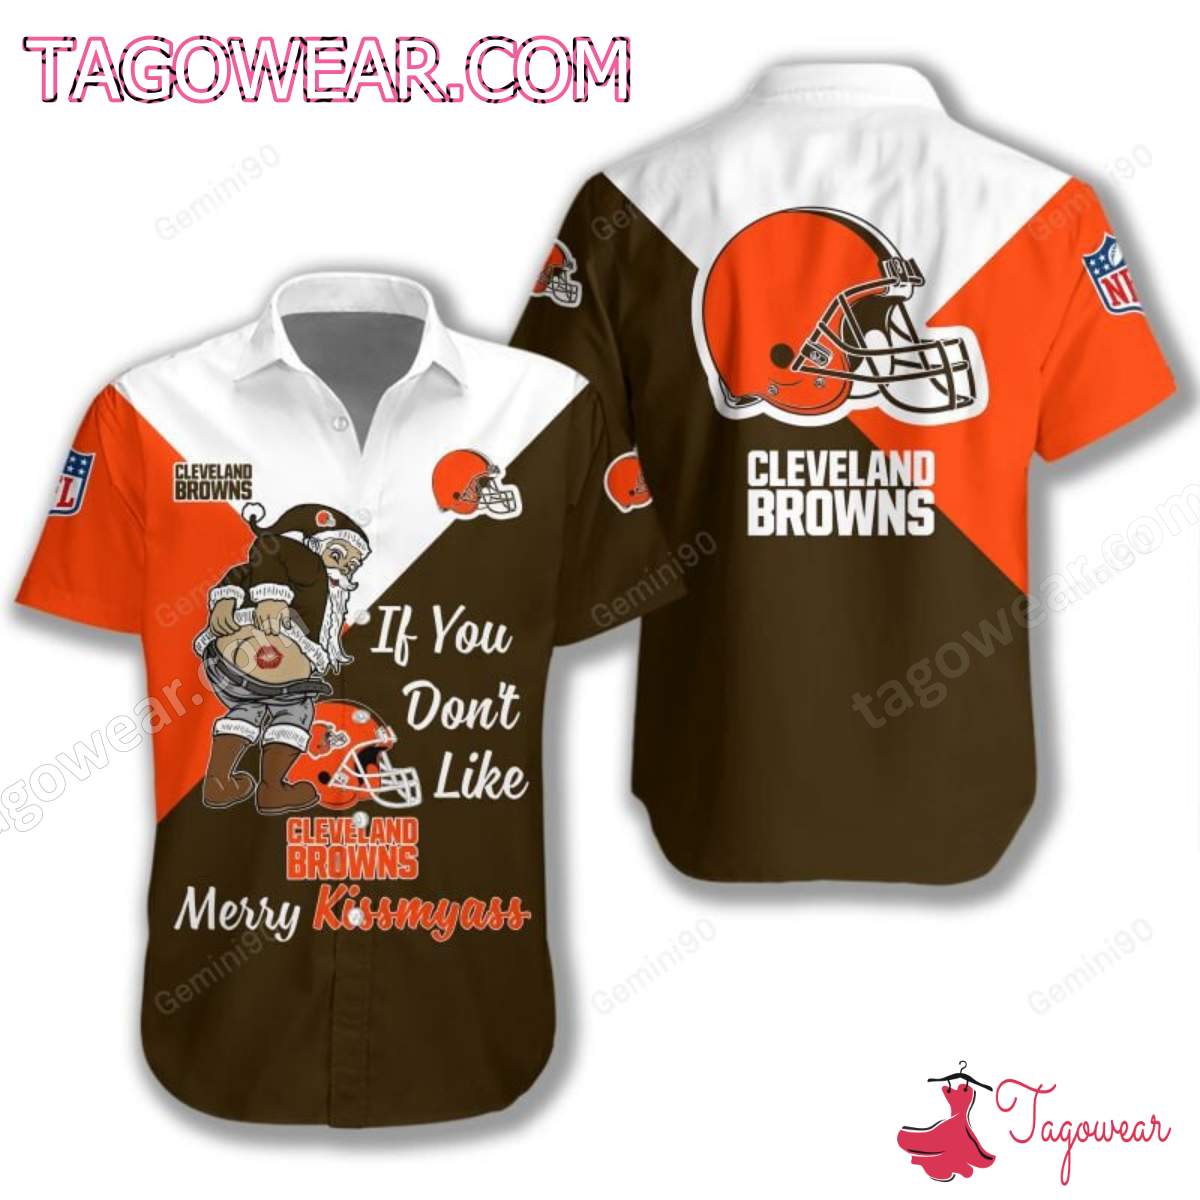 If You Don't Like Cleveland Browns Merry Kissmyass T-shirt, Polo, Hoodie a